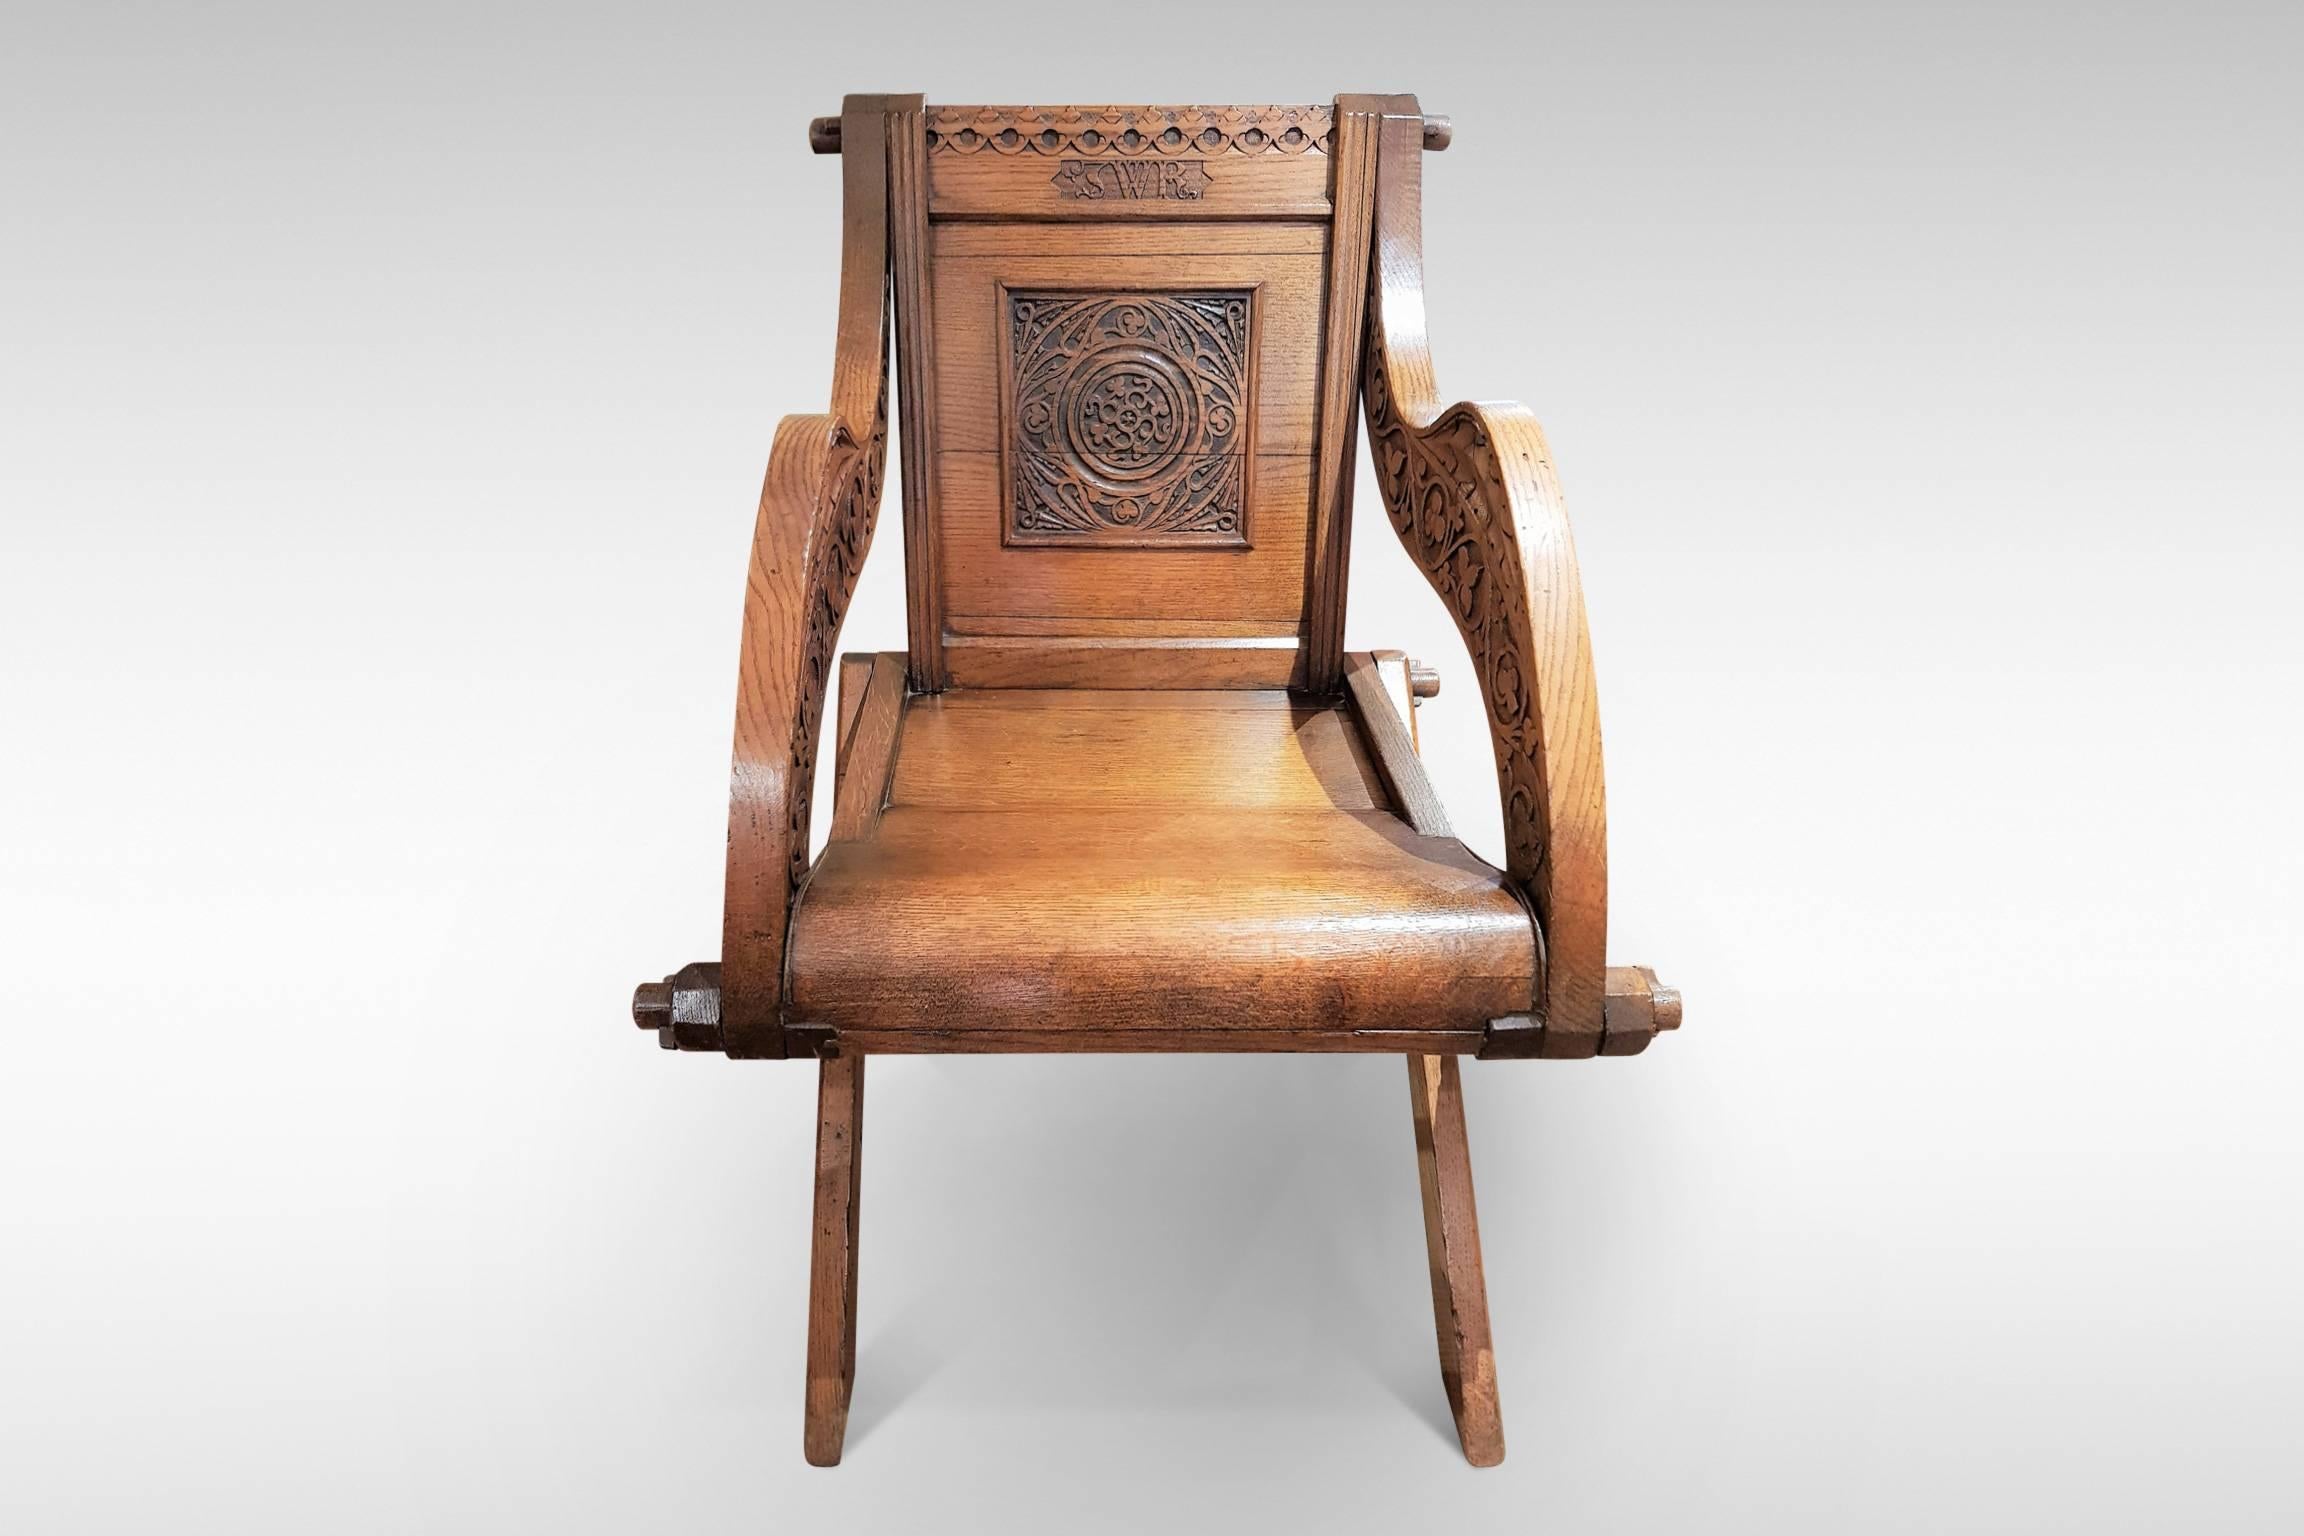 A good quality oak Glastonbury chair from the Arts & Crafts Movement
circa 1900.